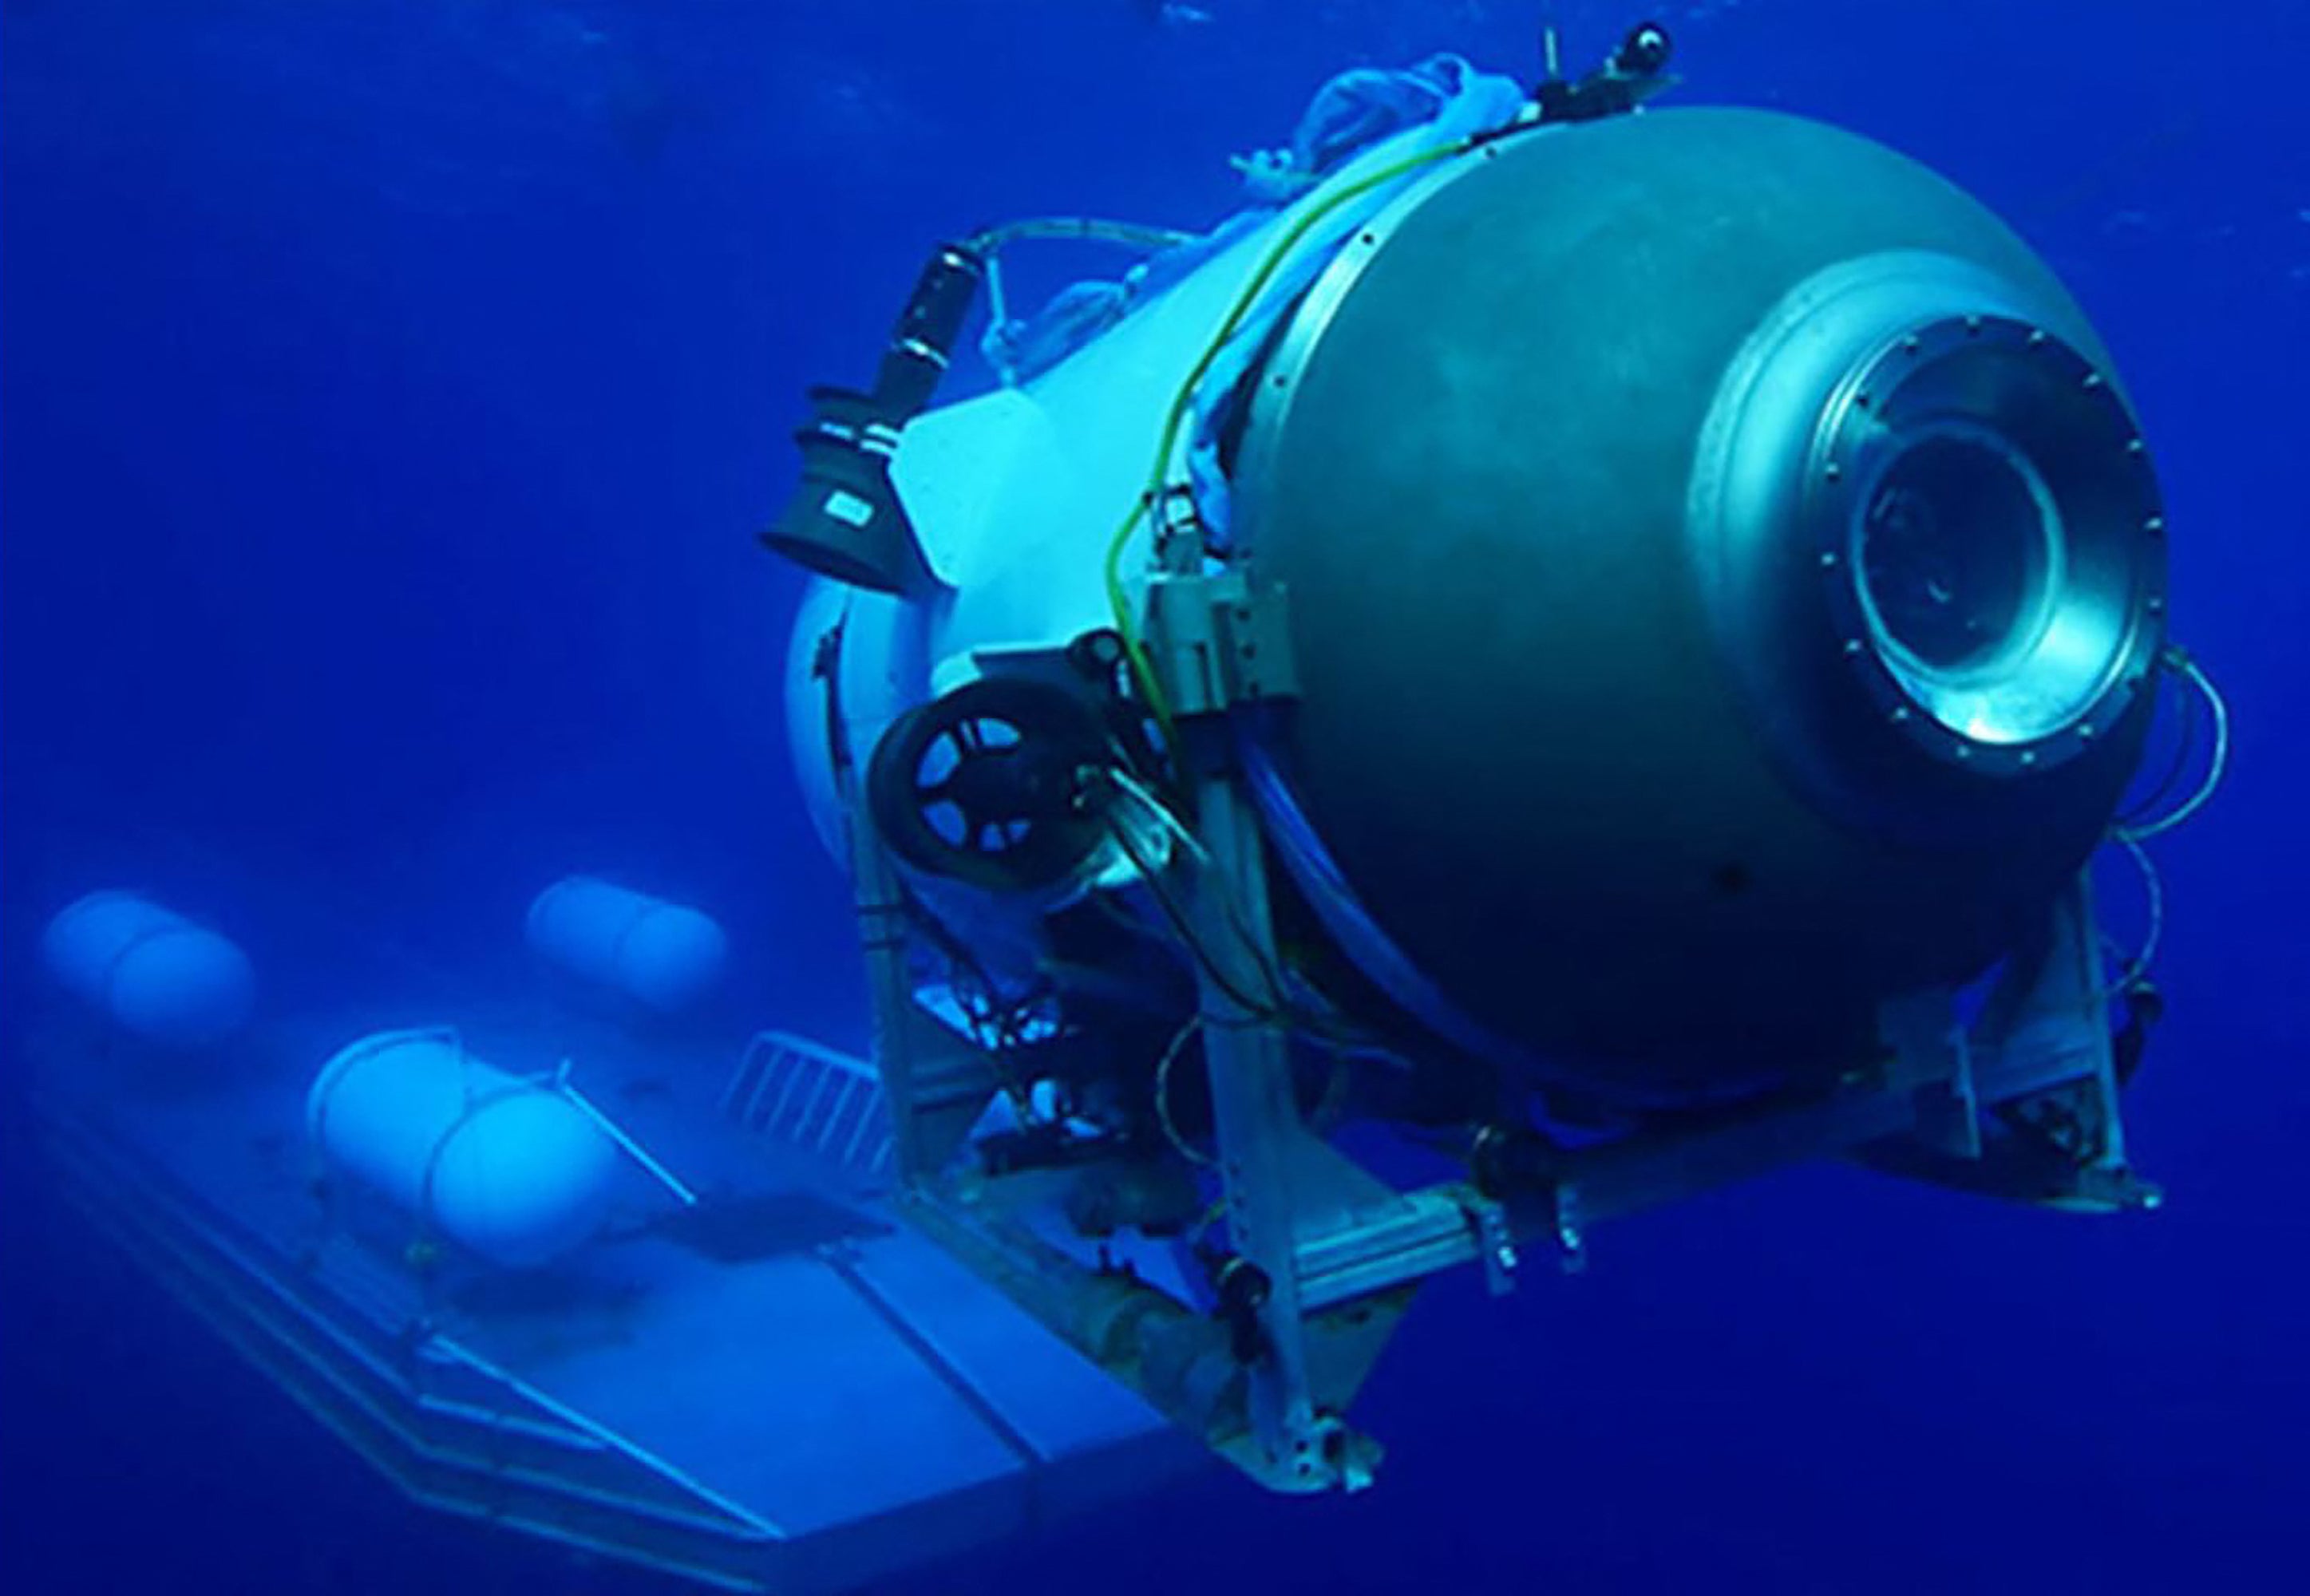 The Titan submersible disappeared on Sunday